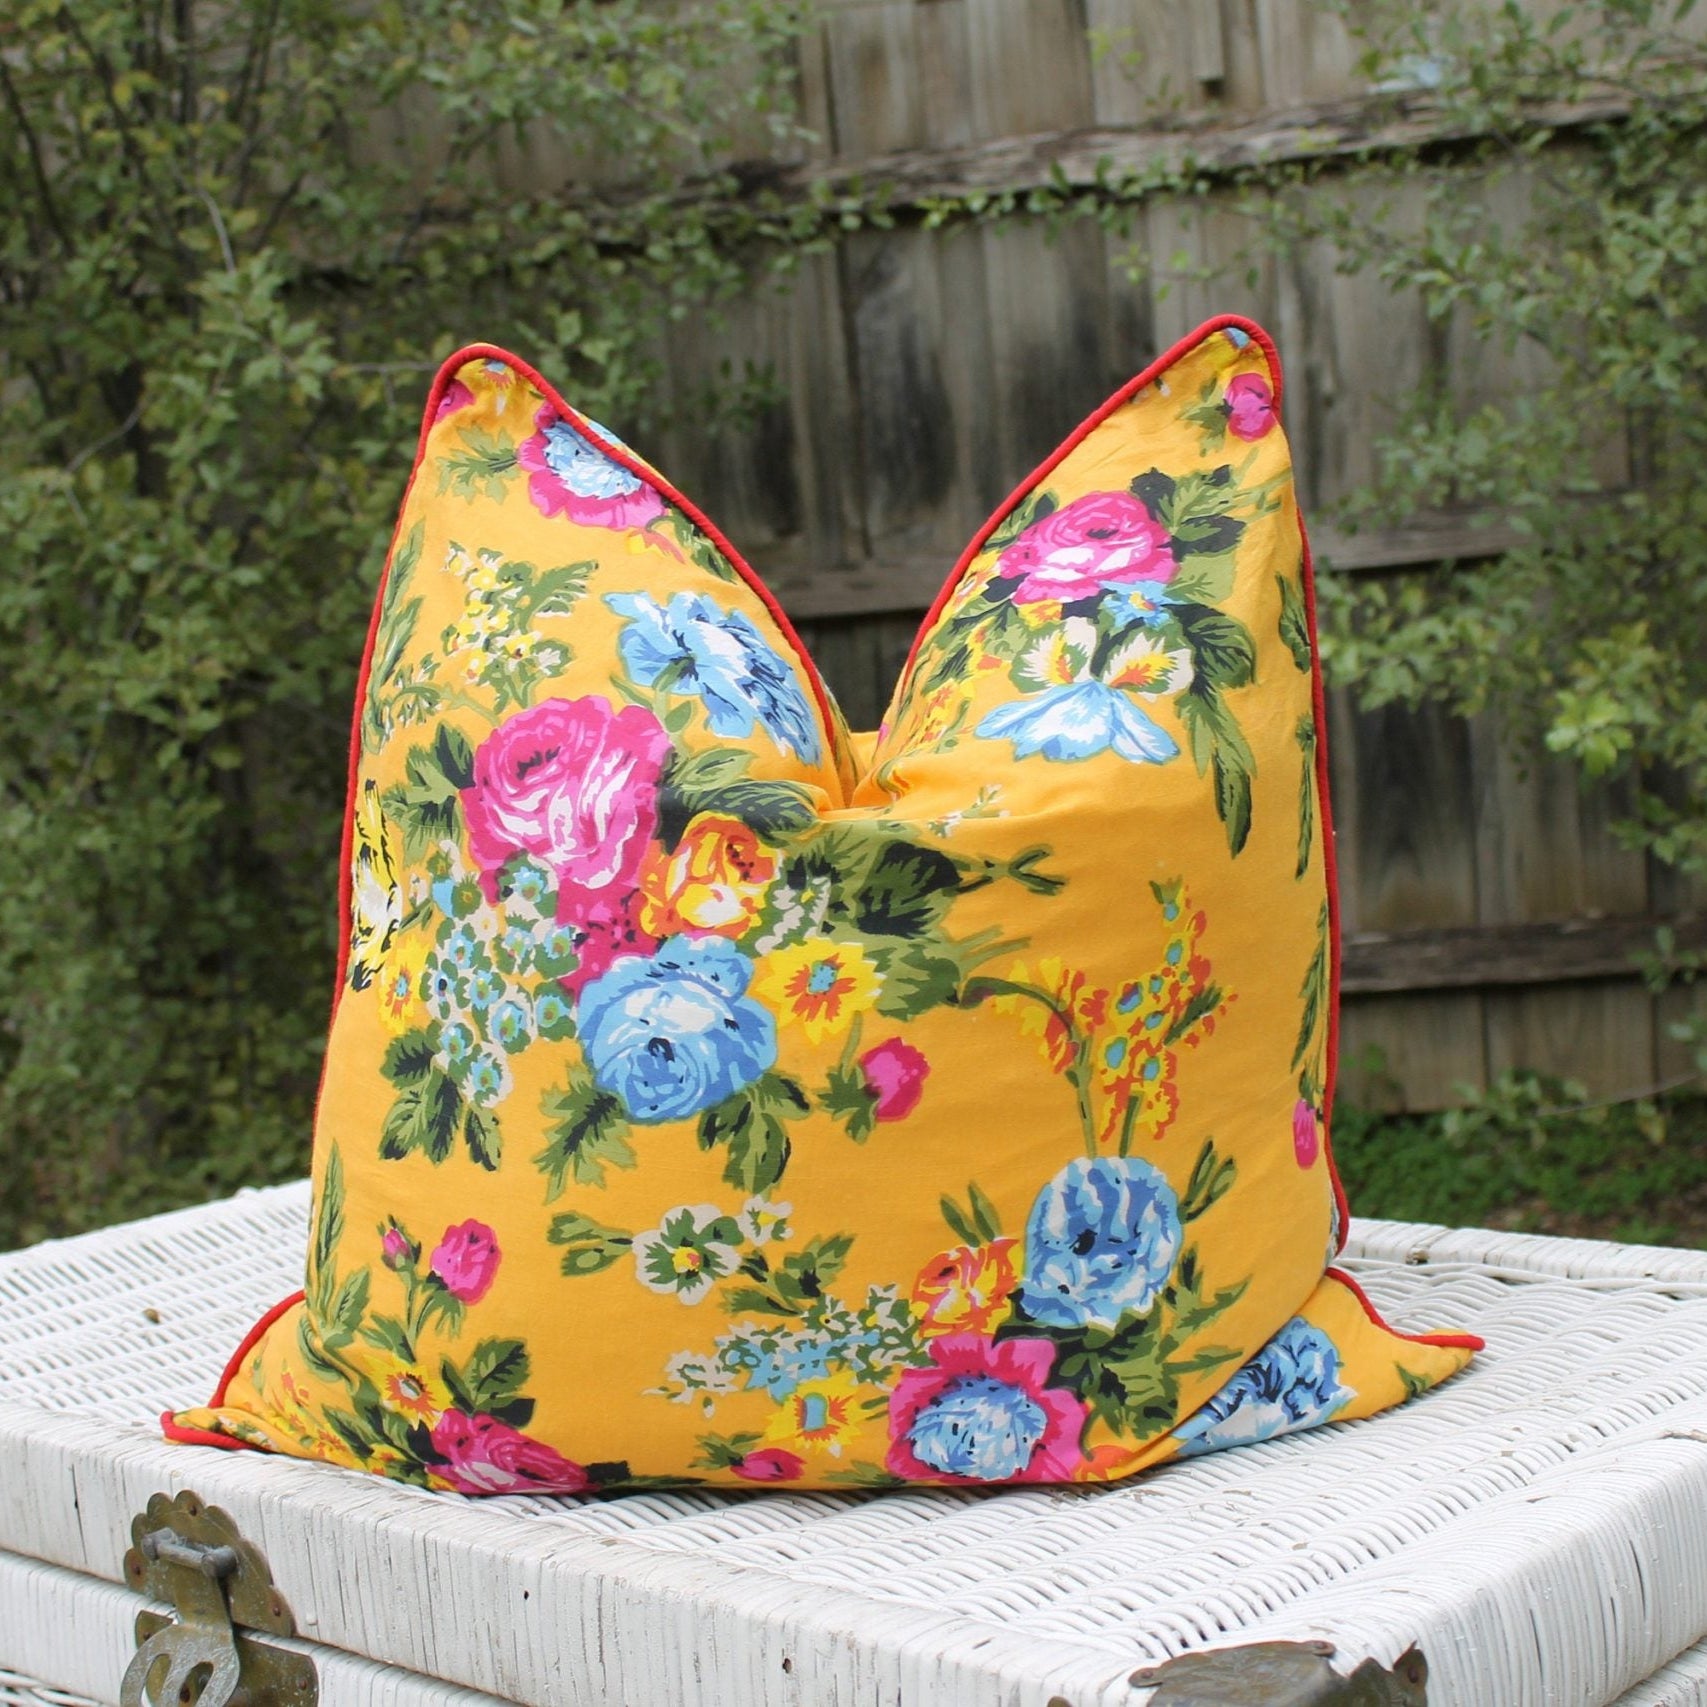 'Cozy Floral Comforts' 100% Handmade Cotton Cushion Cover